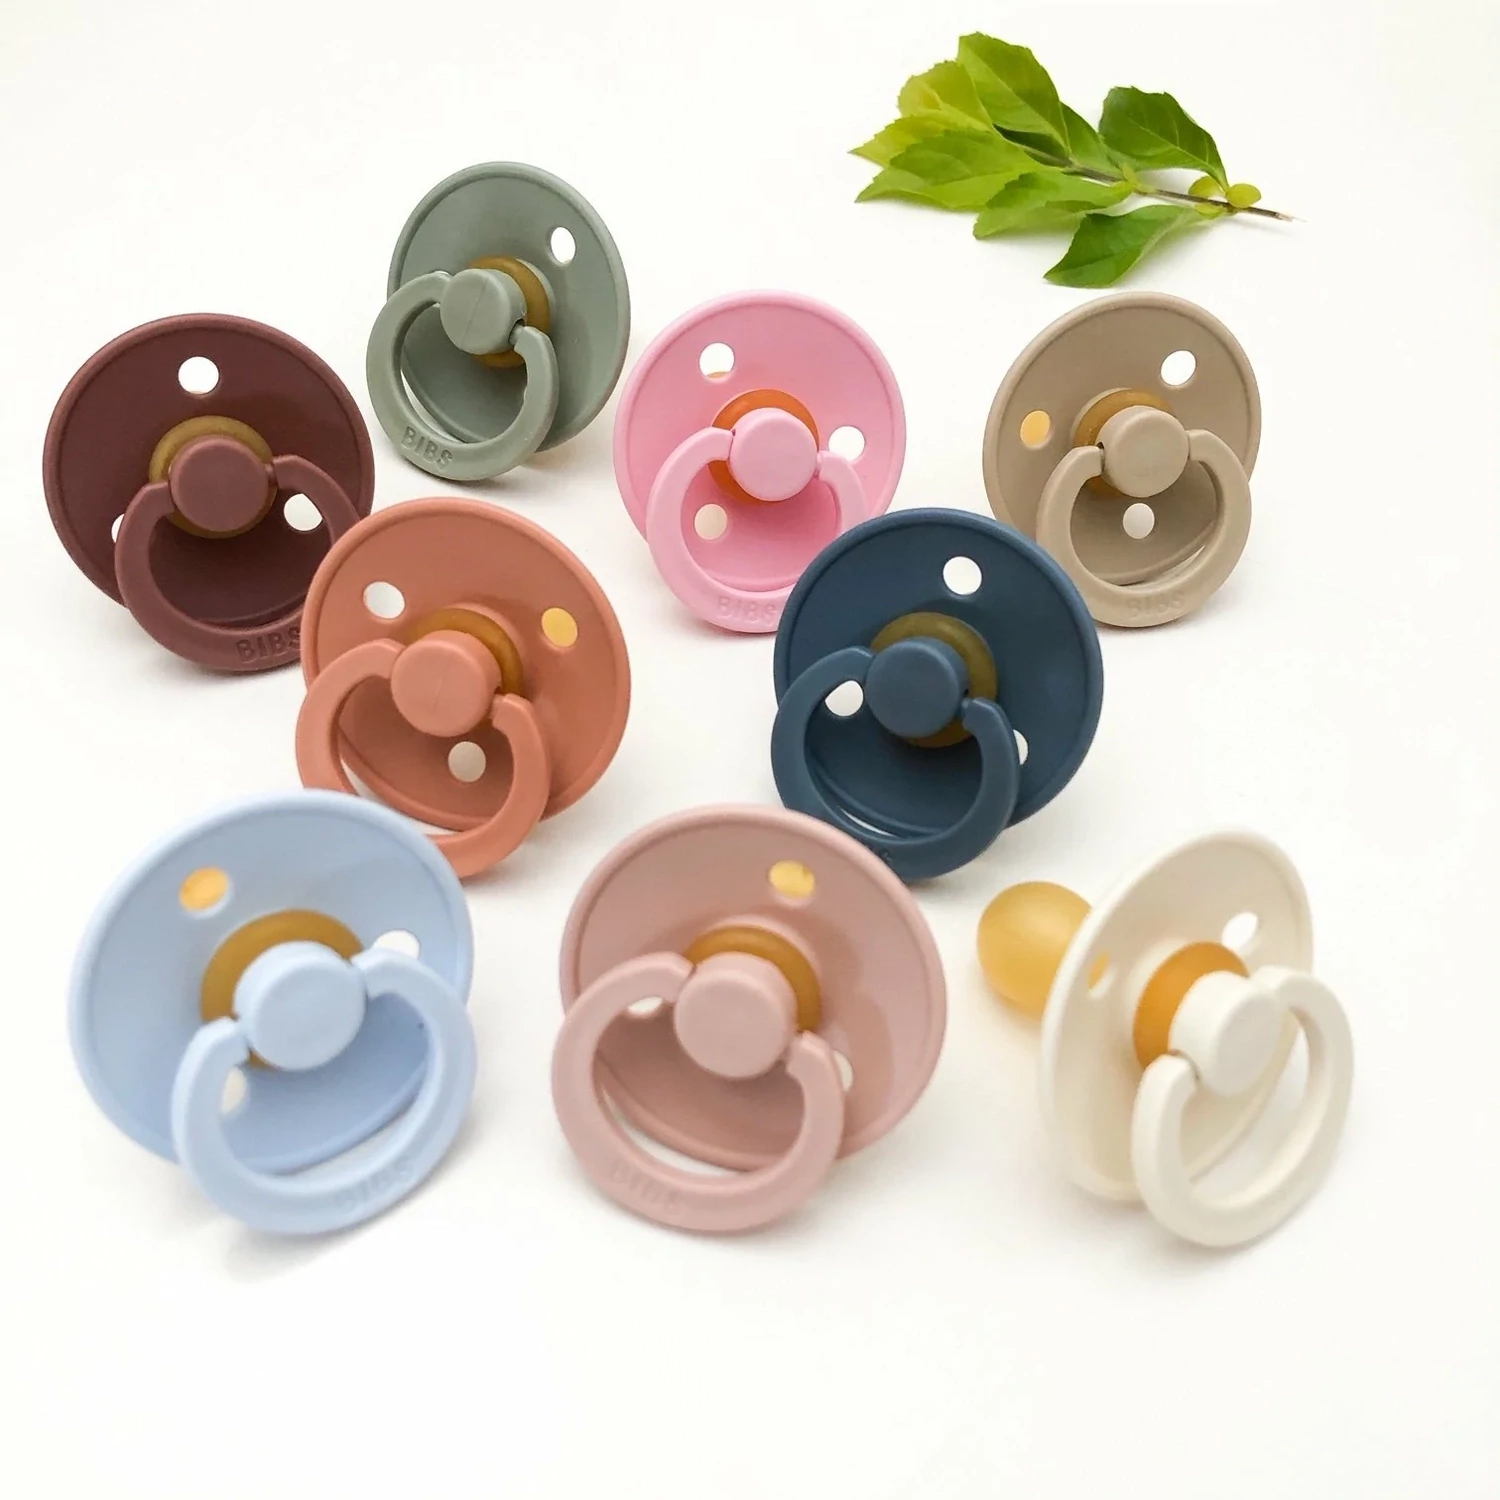 Colour Collection Round Pacifier - 2 Pack - Various